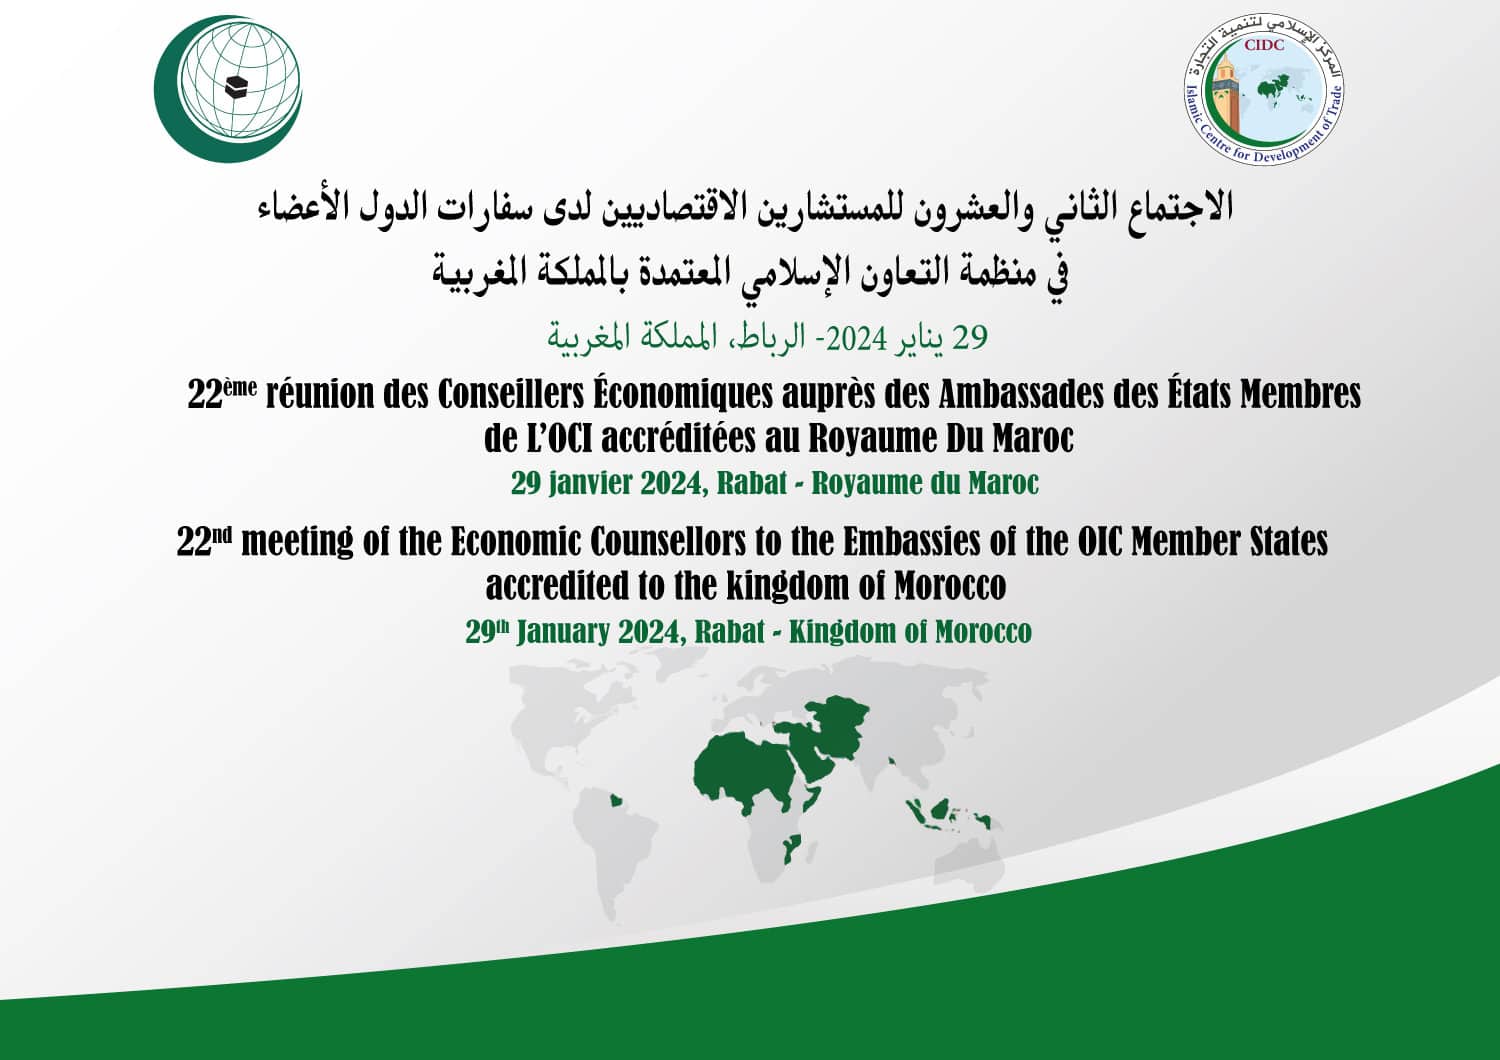 22nd meeting of the Economic Counsellors to the Embassies of the OIC Member States accredited to the kingdom of Morocco